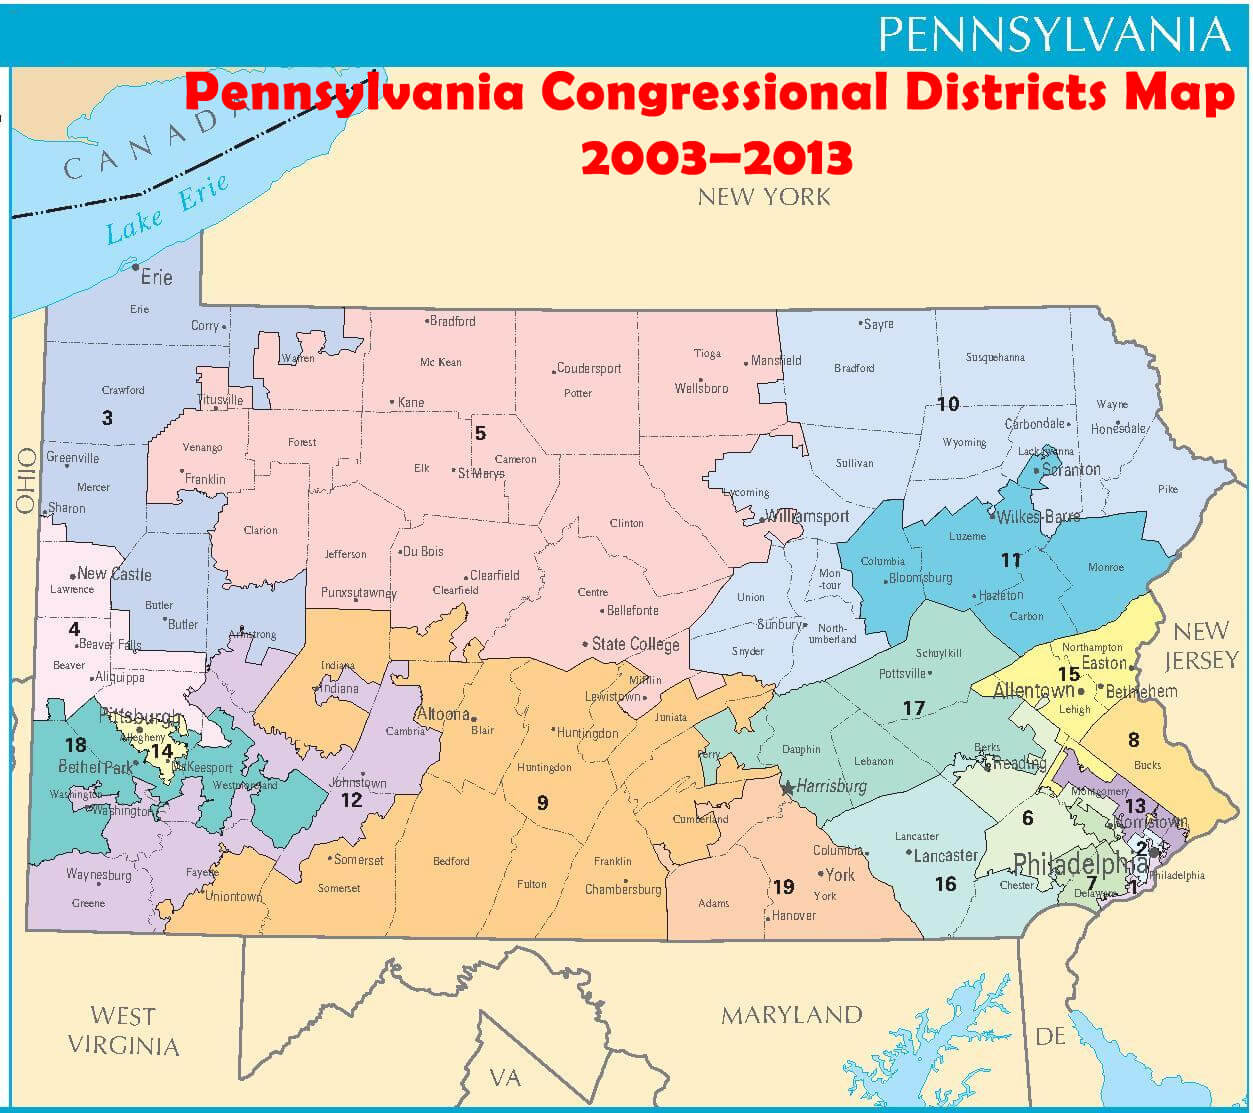 Pennsylvania Congressional Districts Map 2003–2013